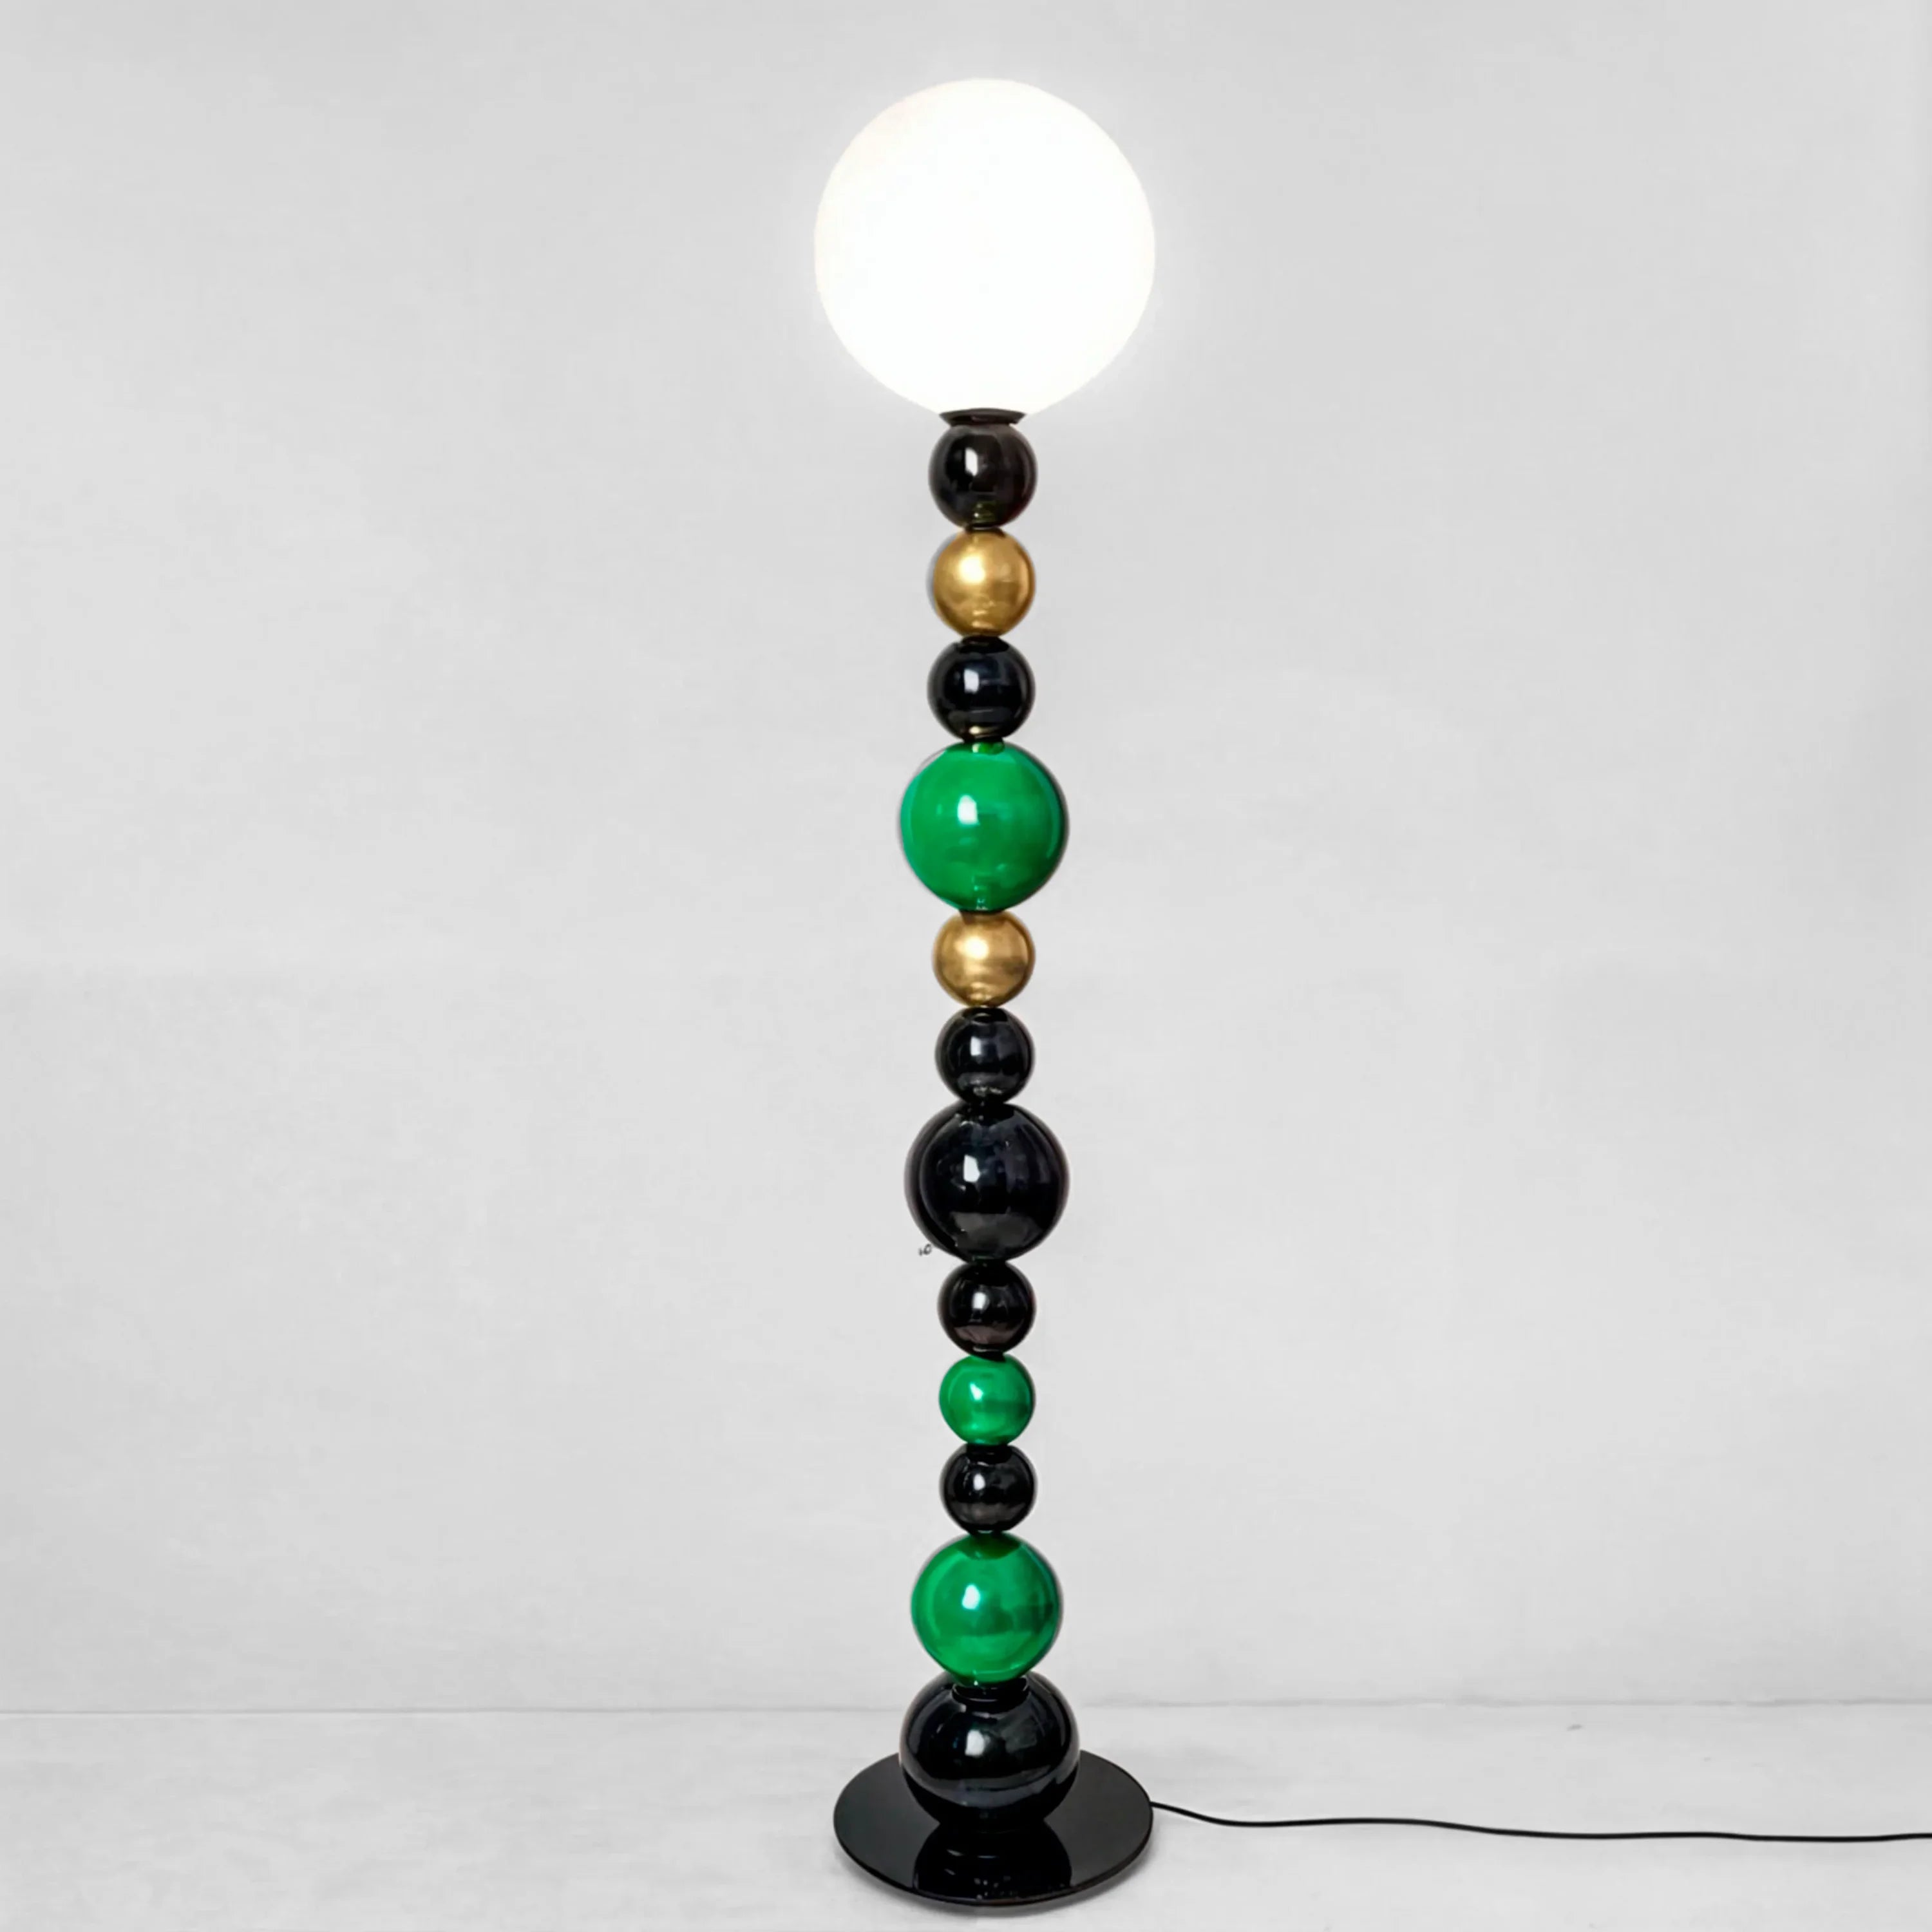 Contemporary Floor Lamp - Colorful Spheres Design 160cm Iron Base Warm Light Csa Ul Listed Ce - Modern Lamps